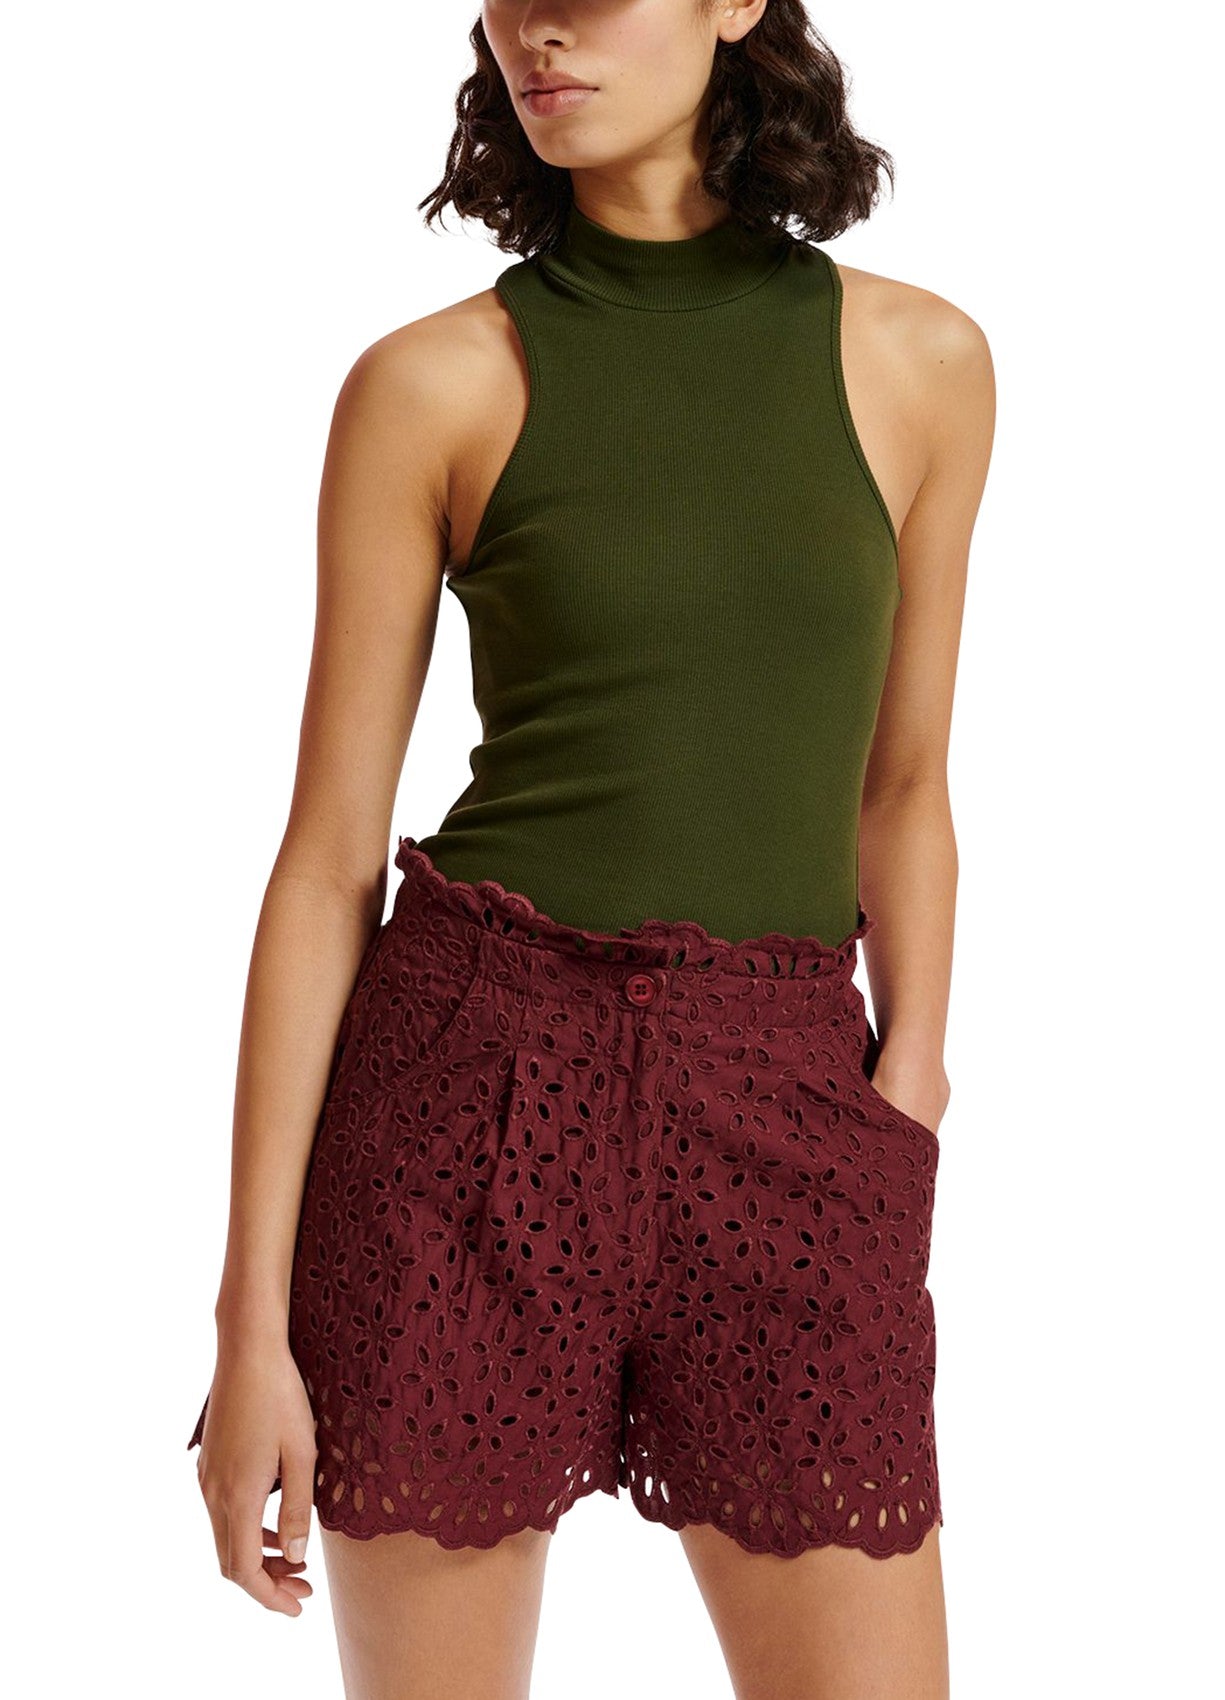 Demano Embroidered Shorts